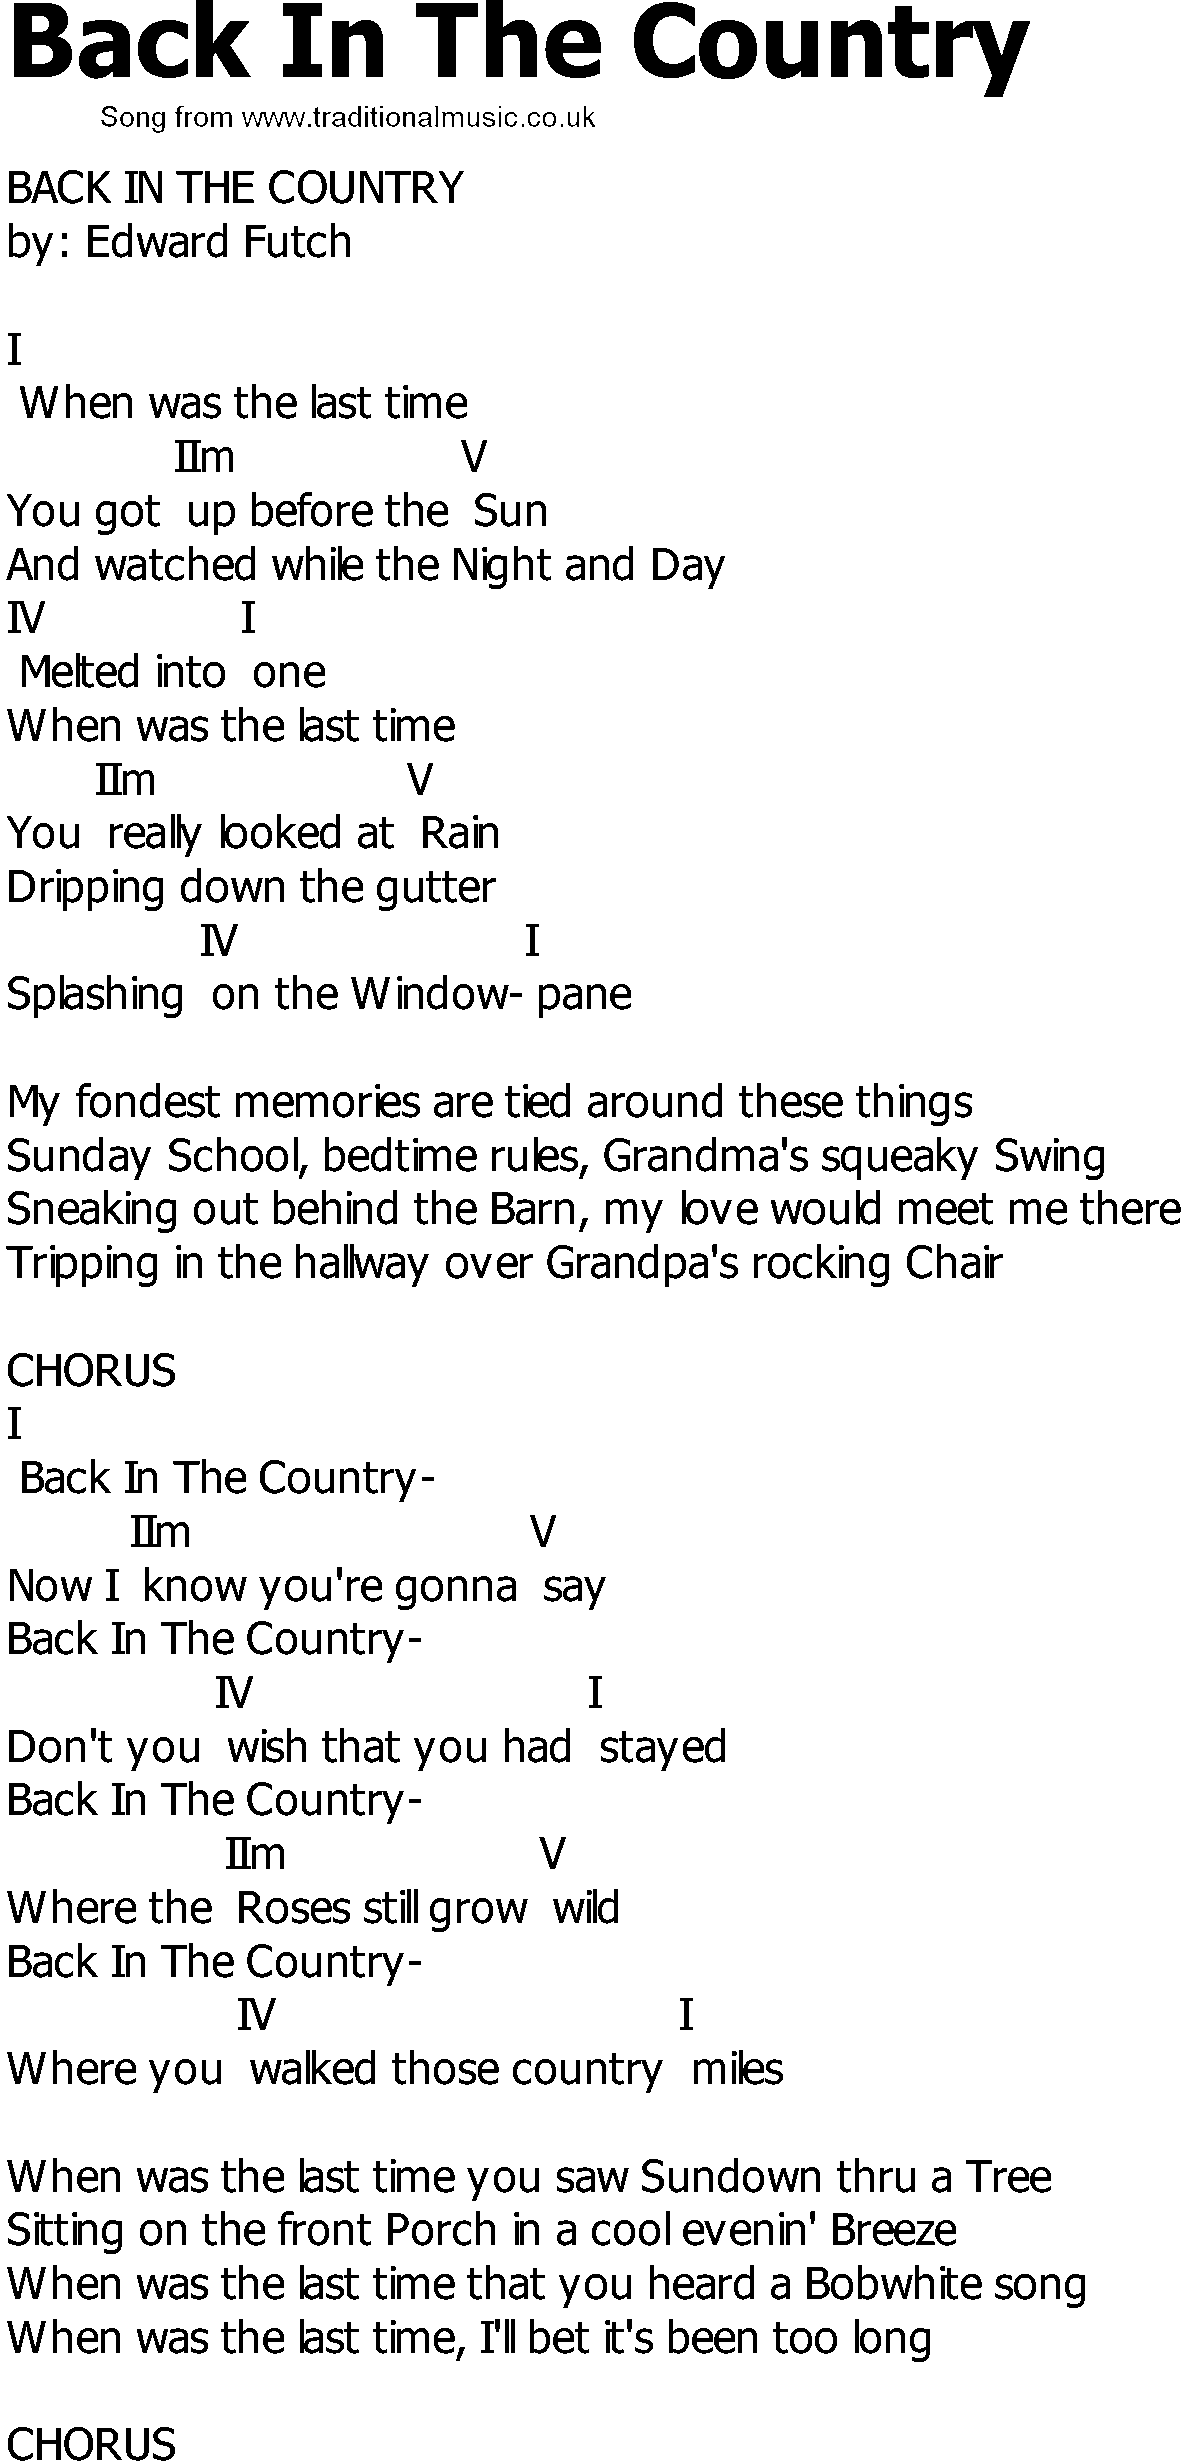 Old Country song lyrics with chords - Back In The Country